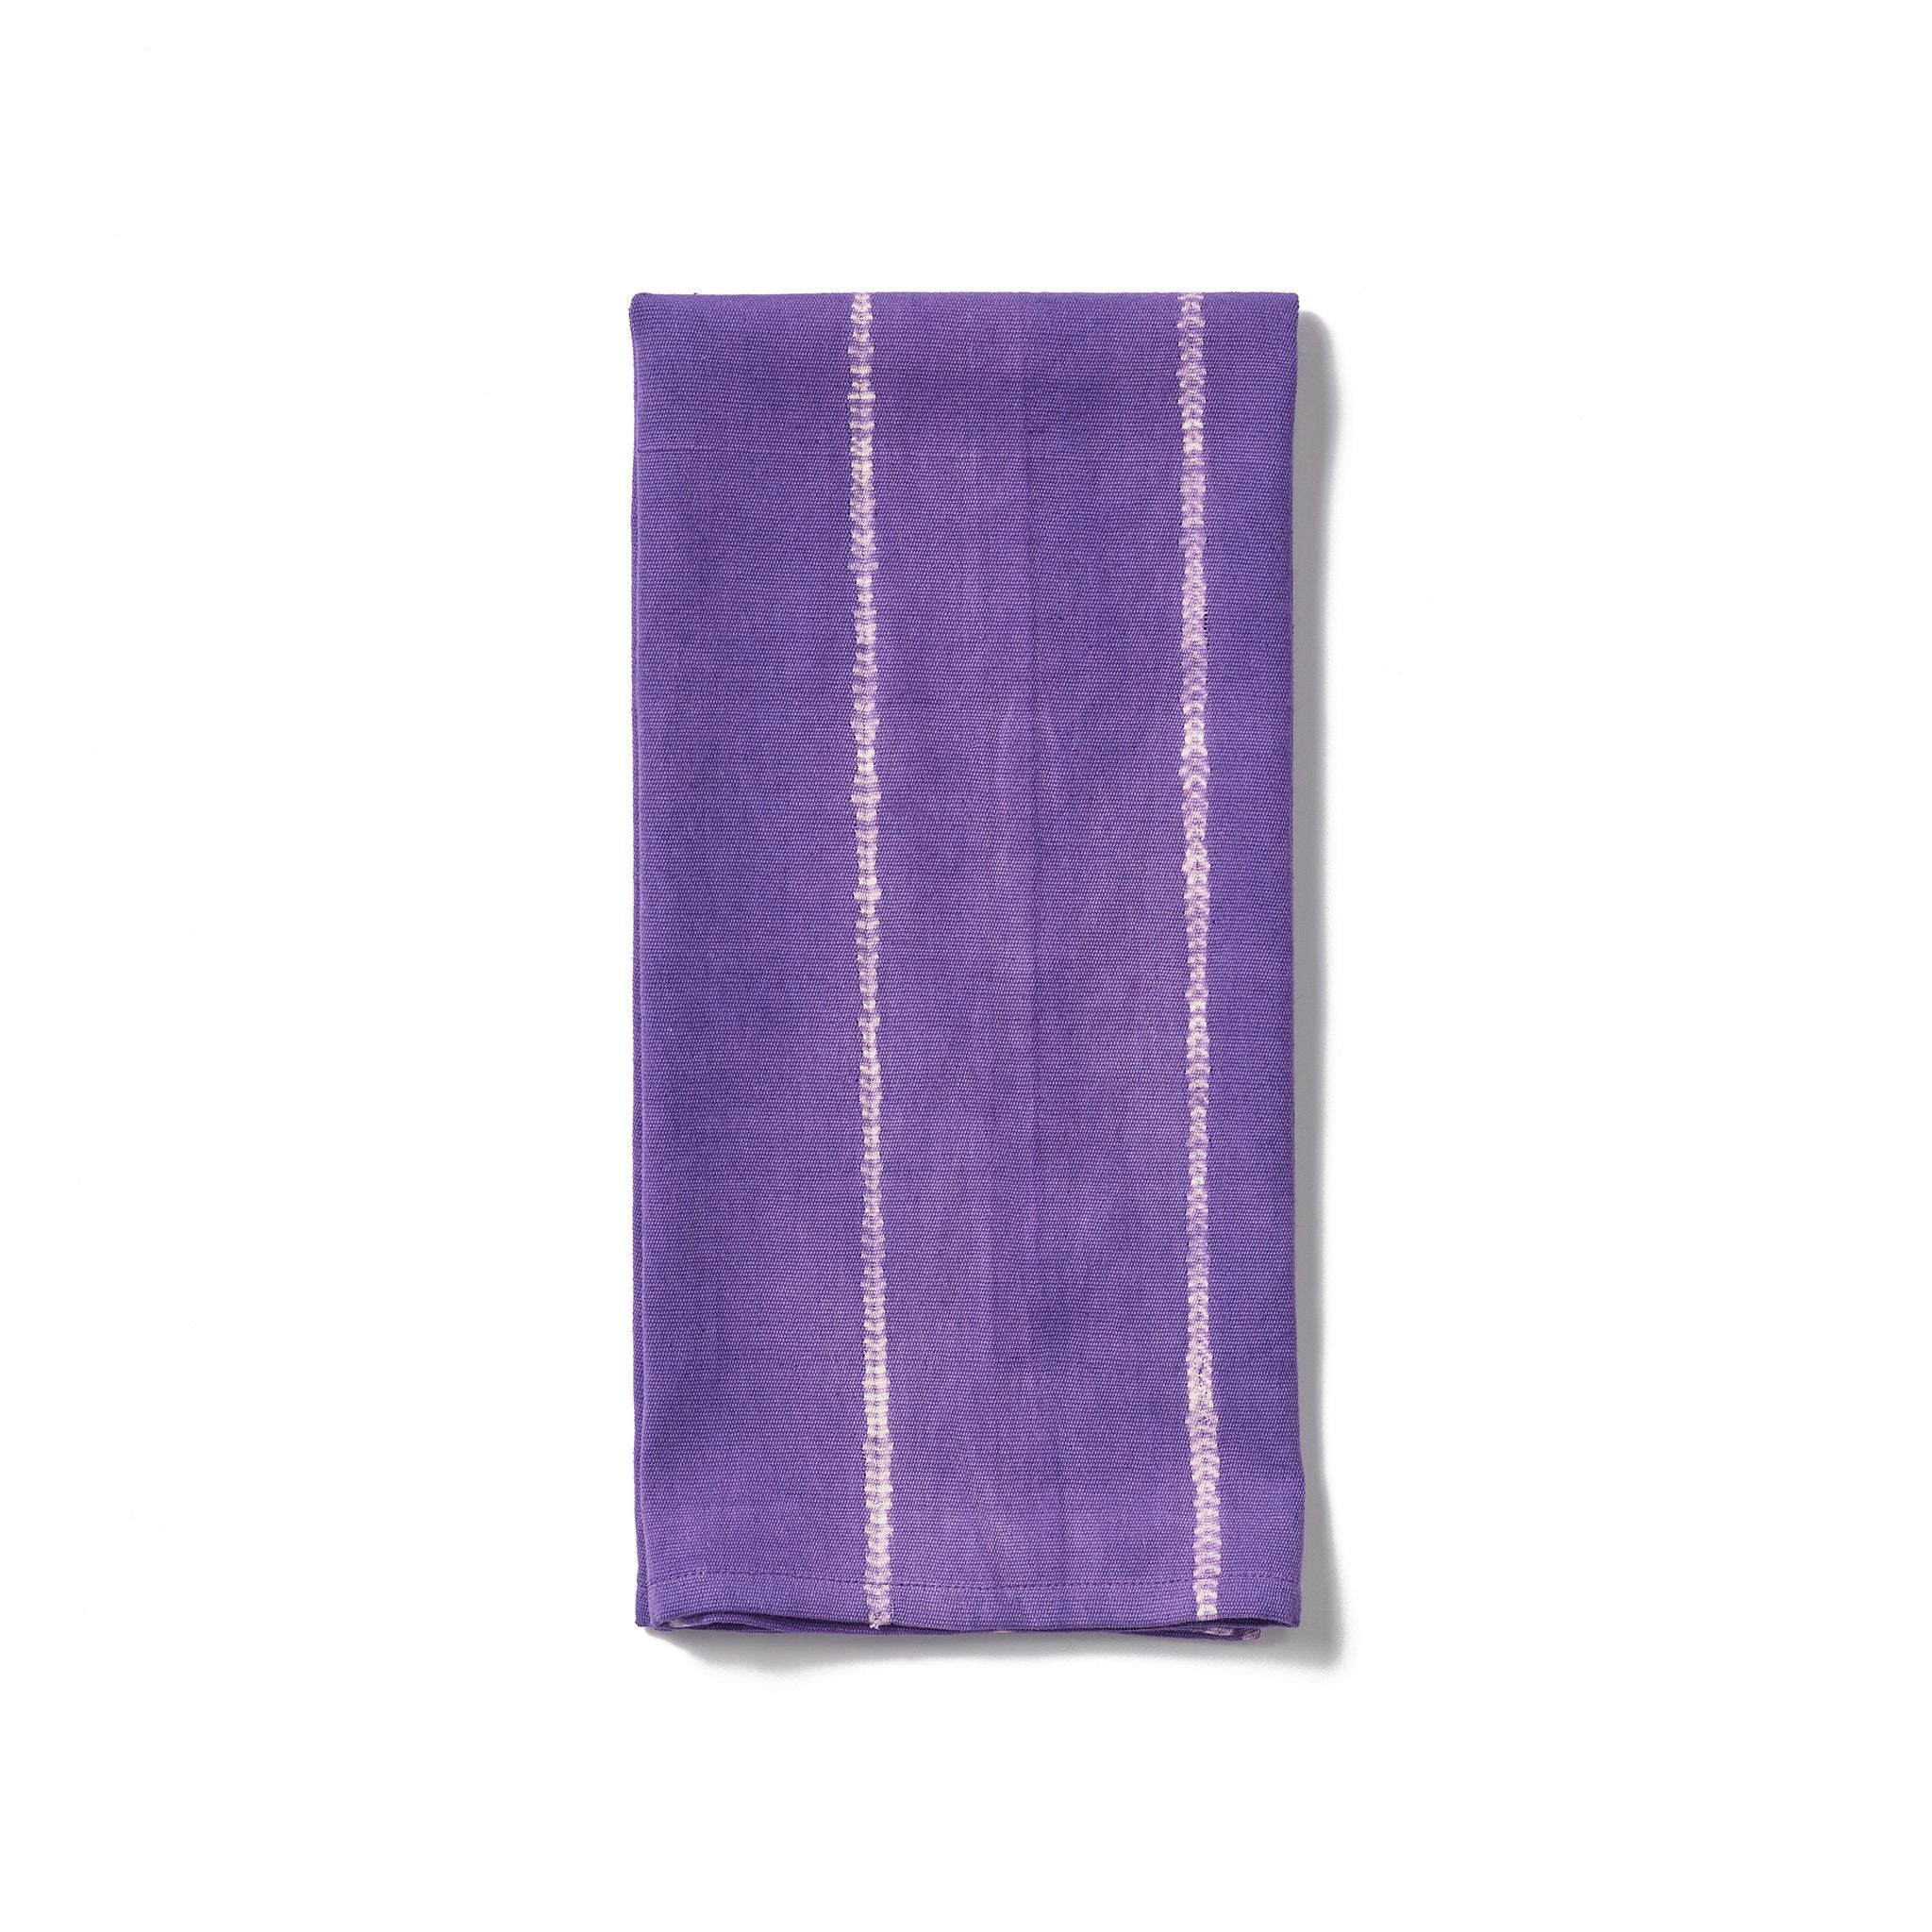 Update your kitchen with this chic yet durable and absorbent purple tie-dye kitchen towel, hand-woven from 100% Ethiopian cotton and dyed in small batches.